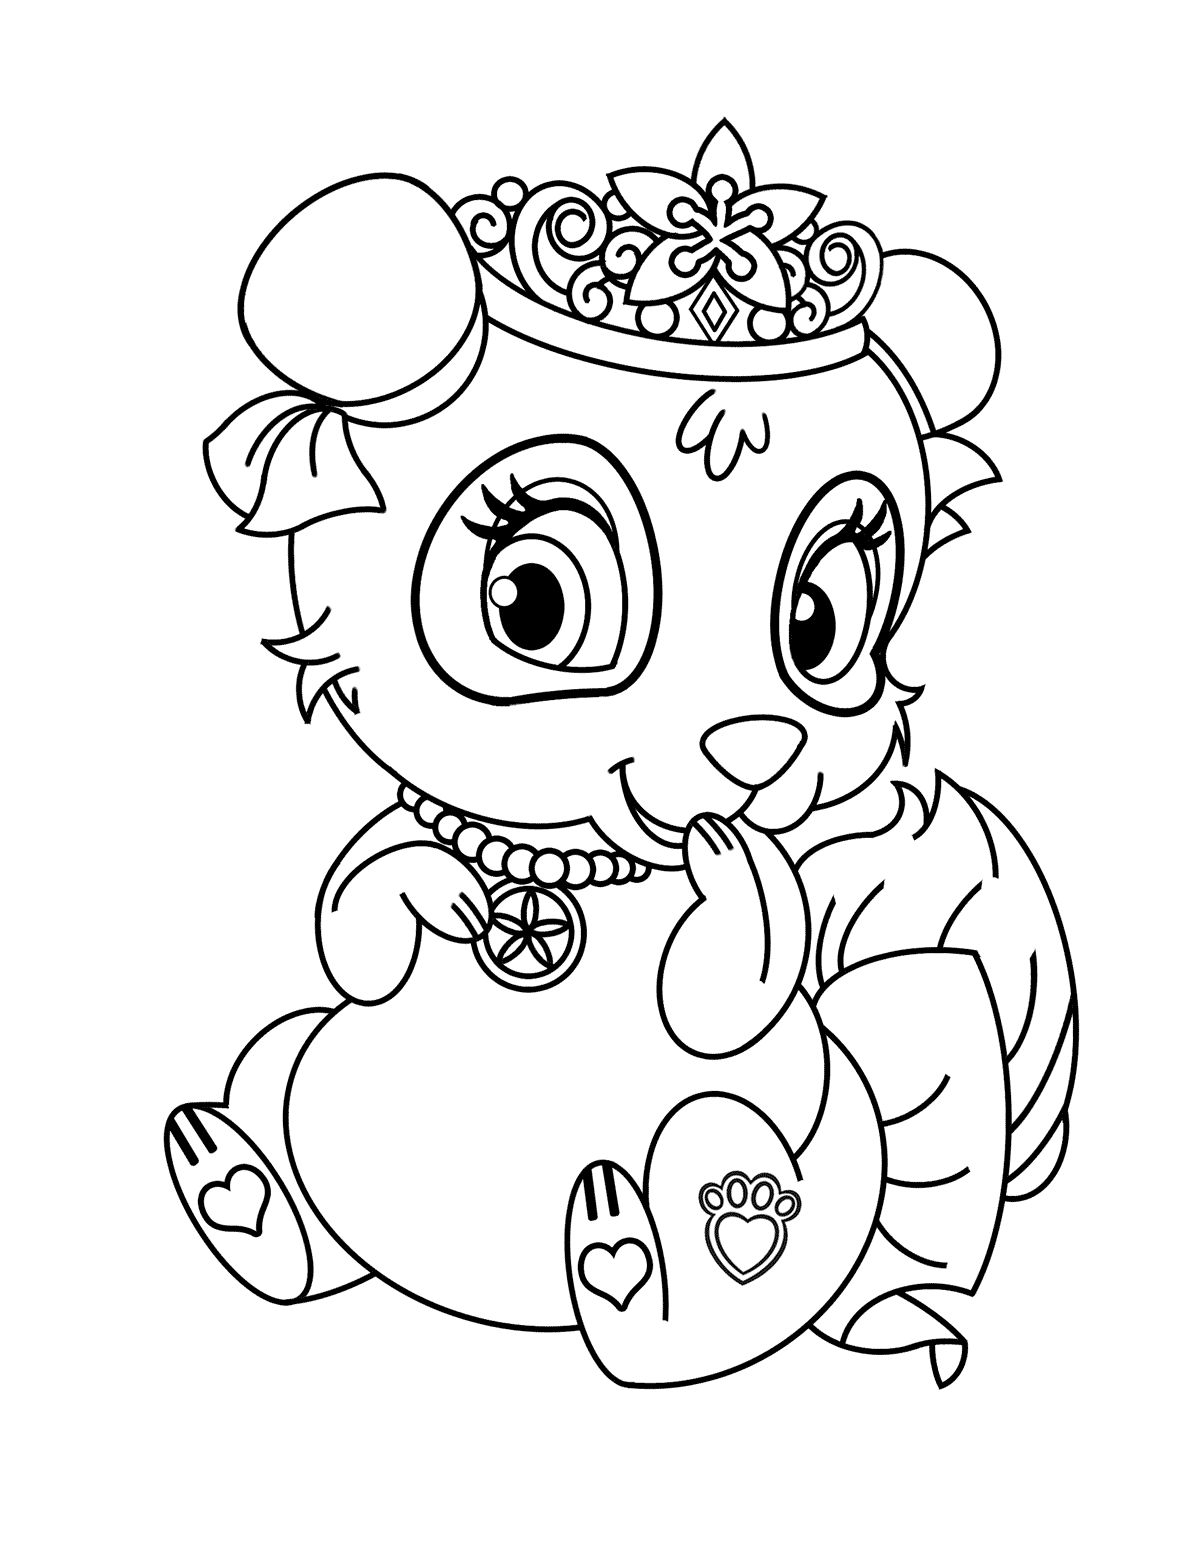 palace pets coloring pages